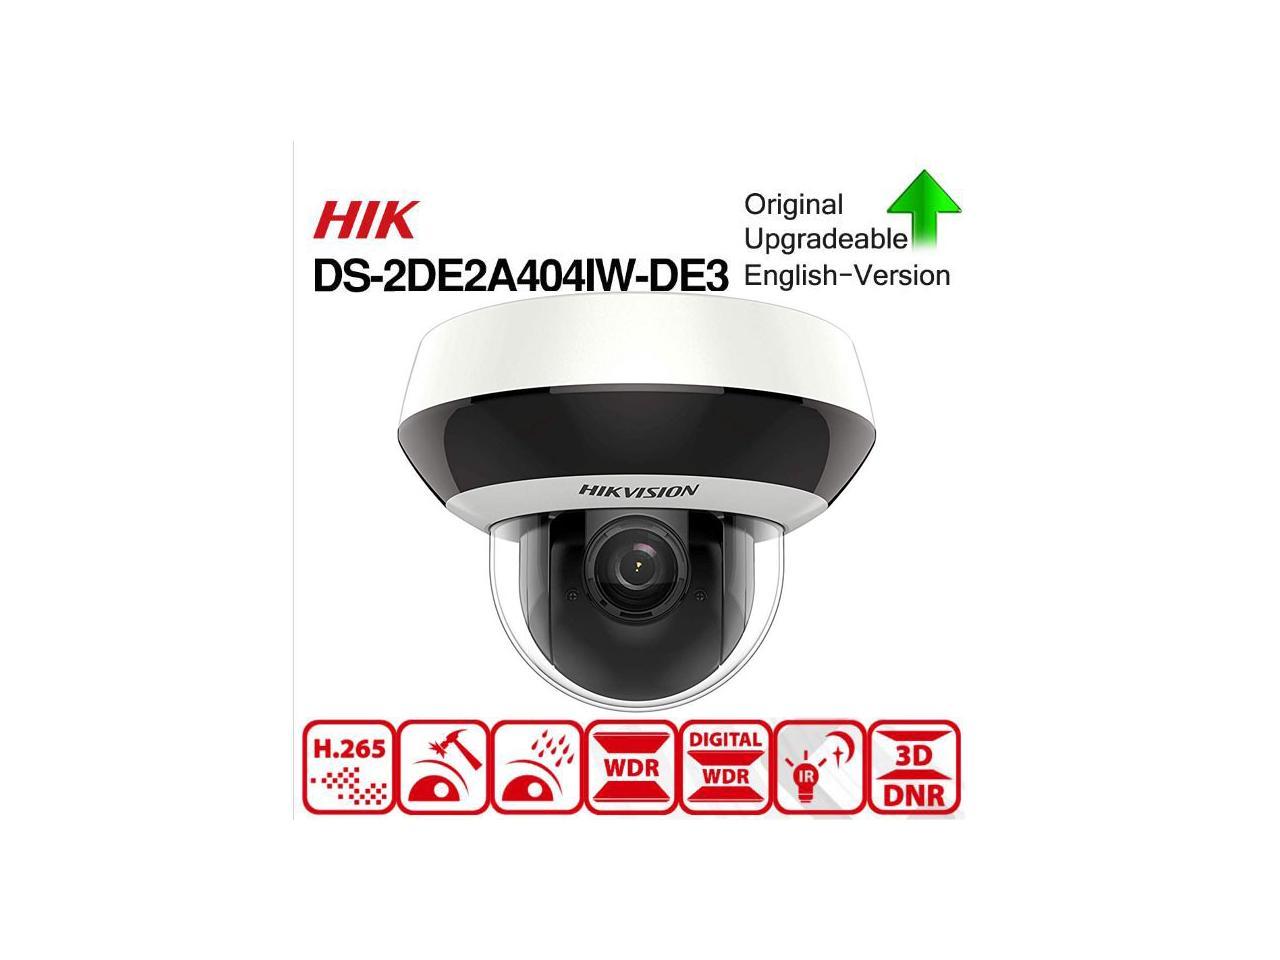 Migration Typically fight Hikvision 4MP PTZ POE IP Camera DS-2DE2A404IW-DE3, Pan/Tilt/2.8mm~12mm 4X  Optical Zoom, 4MP (2560x1440),Night Vision 20m,SD Card  Recording,Outdoor/Home Audio Input Output,IP66 and IK10, H.265+, 1-Pcs -  Newegg.com